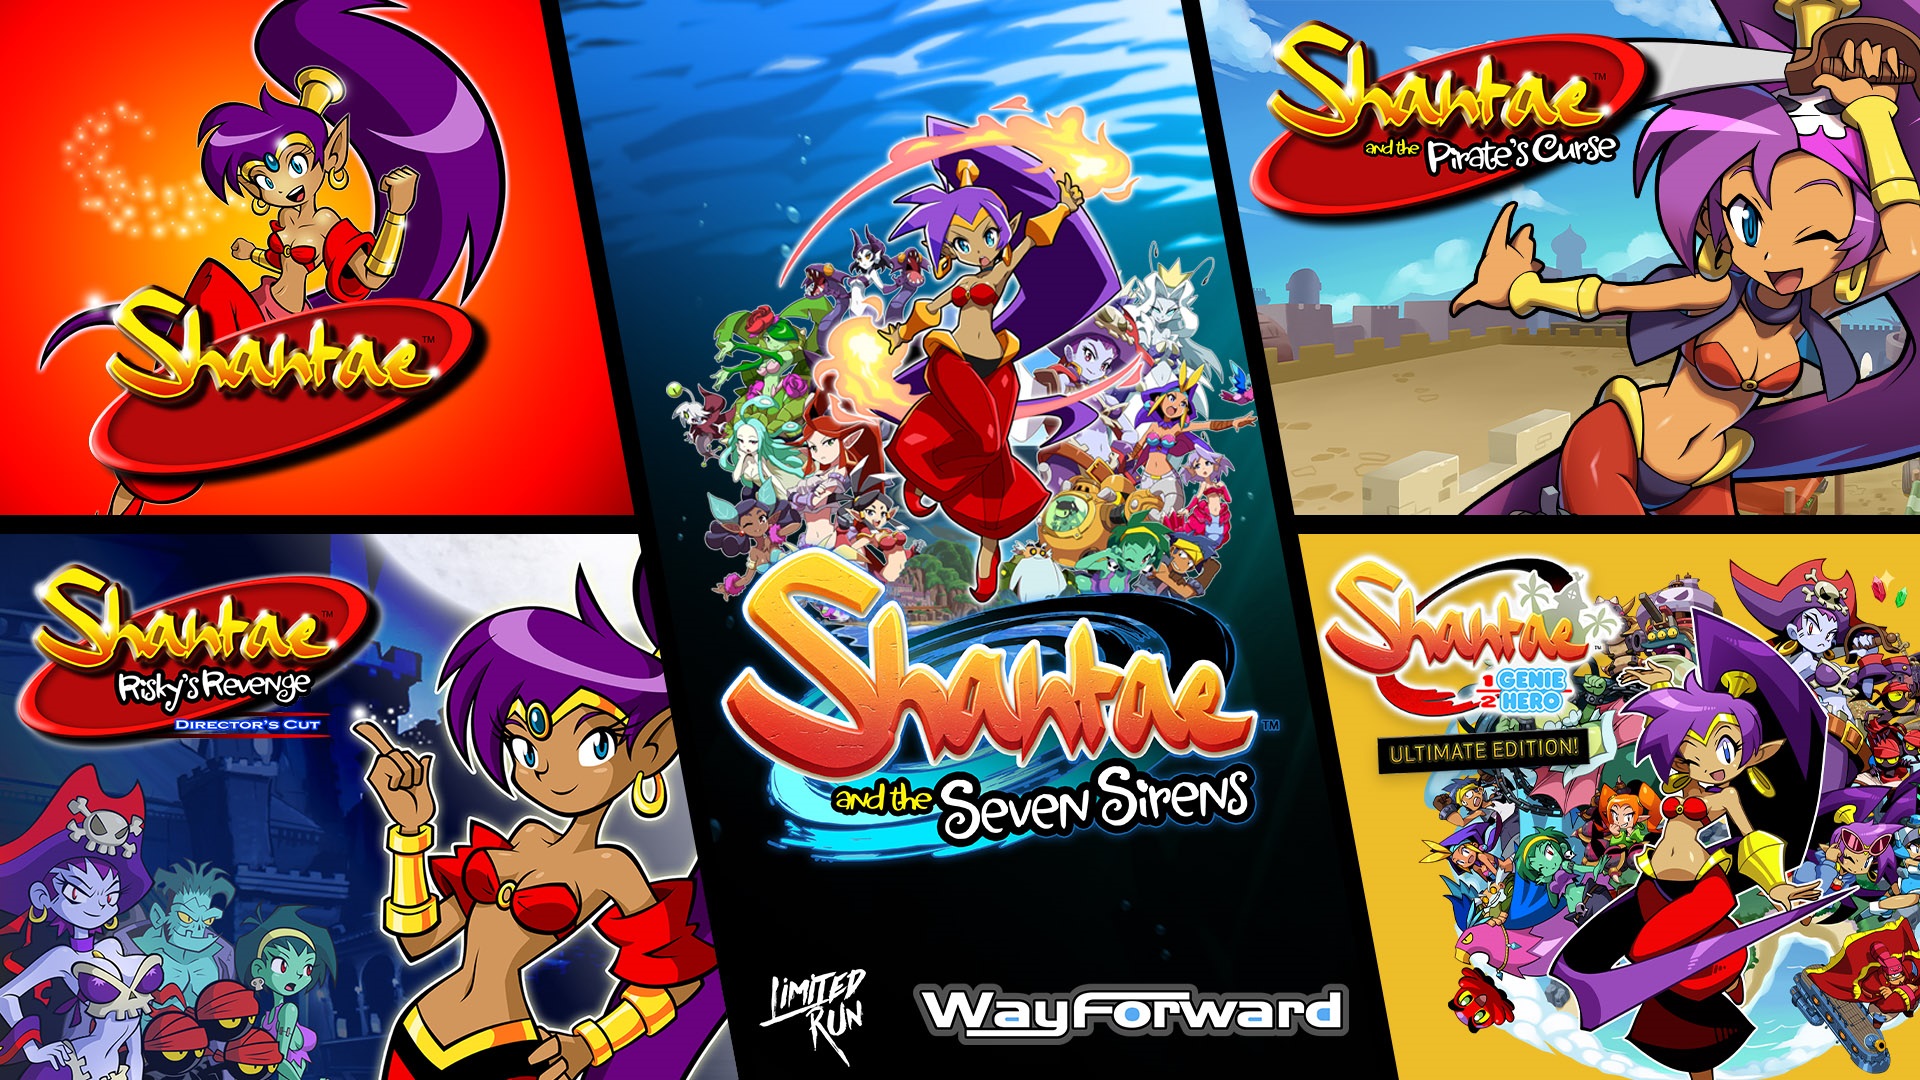 Shantae 1-5 Games are Coming to PS5